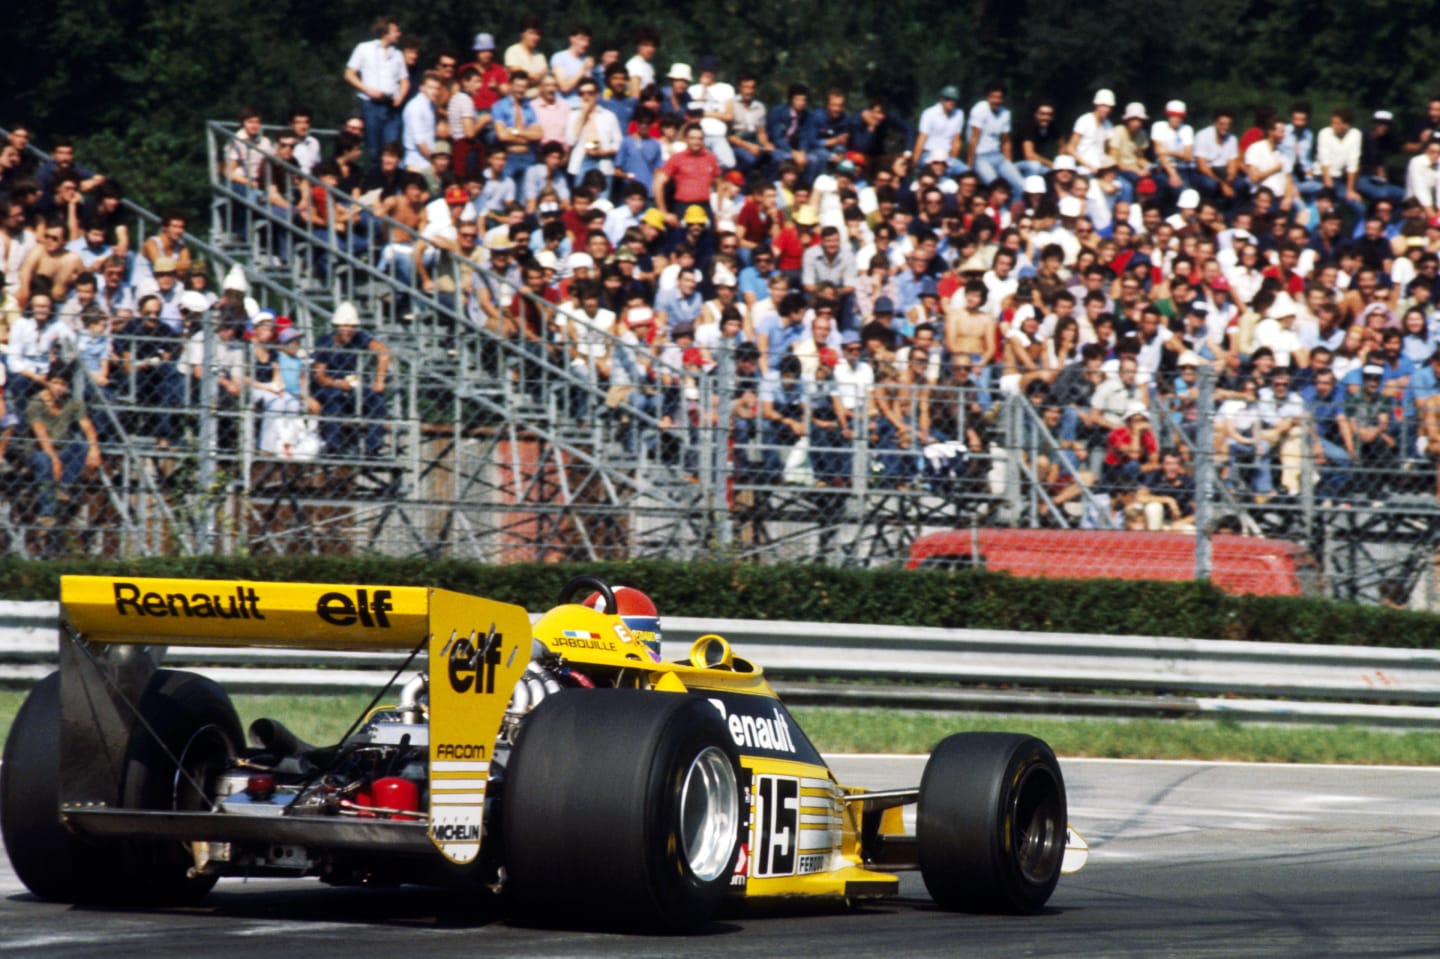 Jean-Pierre Jabouille (FRA) Renault RS01 retired from the race on lap 24 with a blown